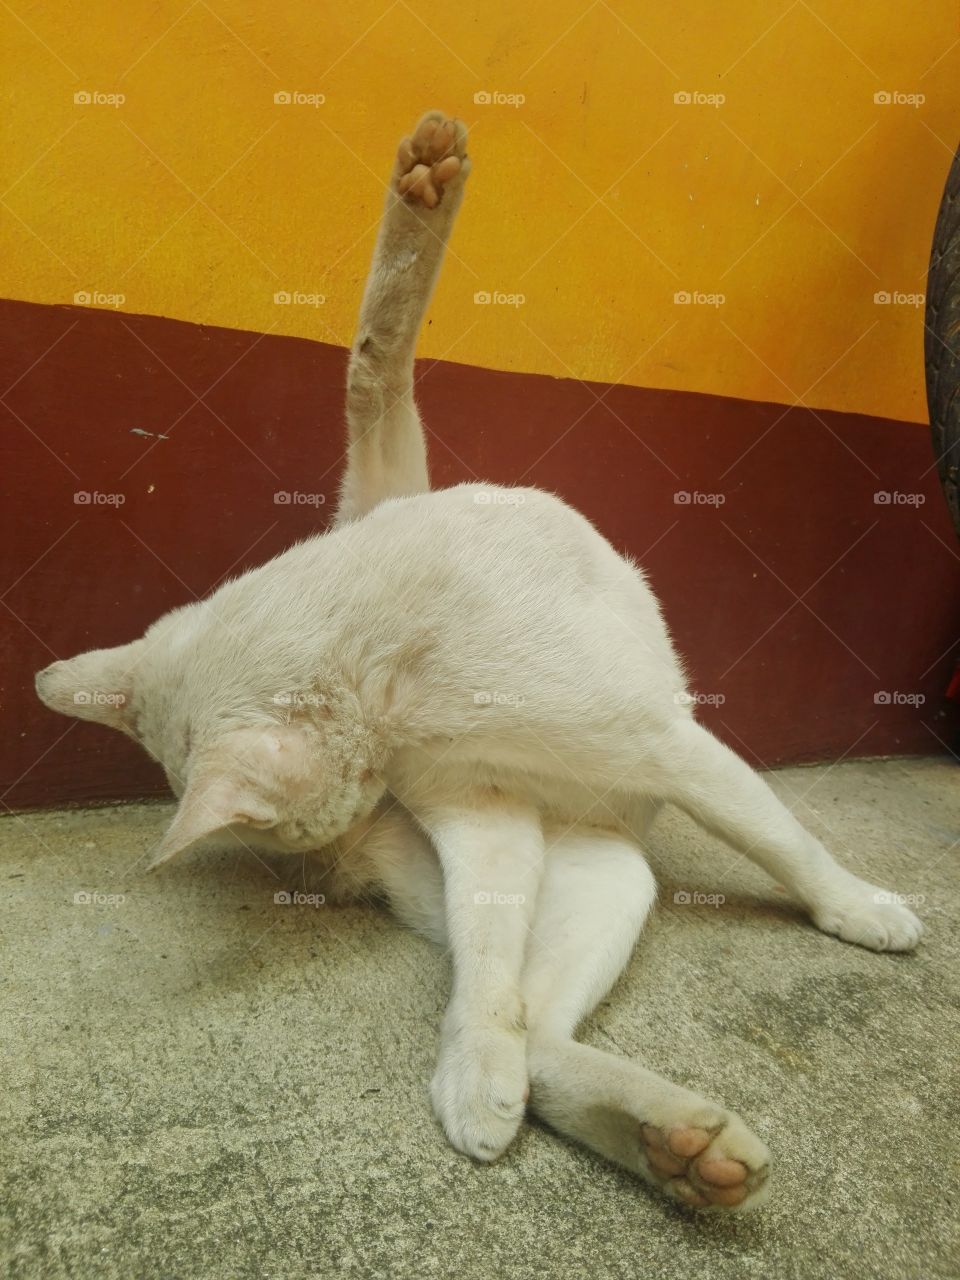 A cat cleaning its self up. Looks hilarious.